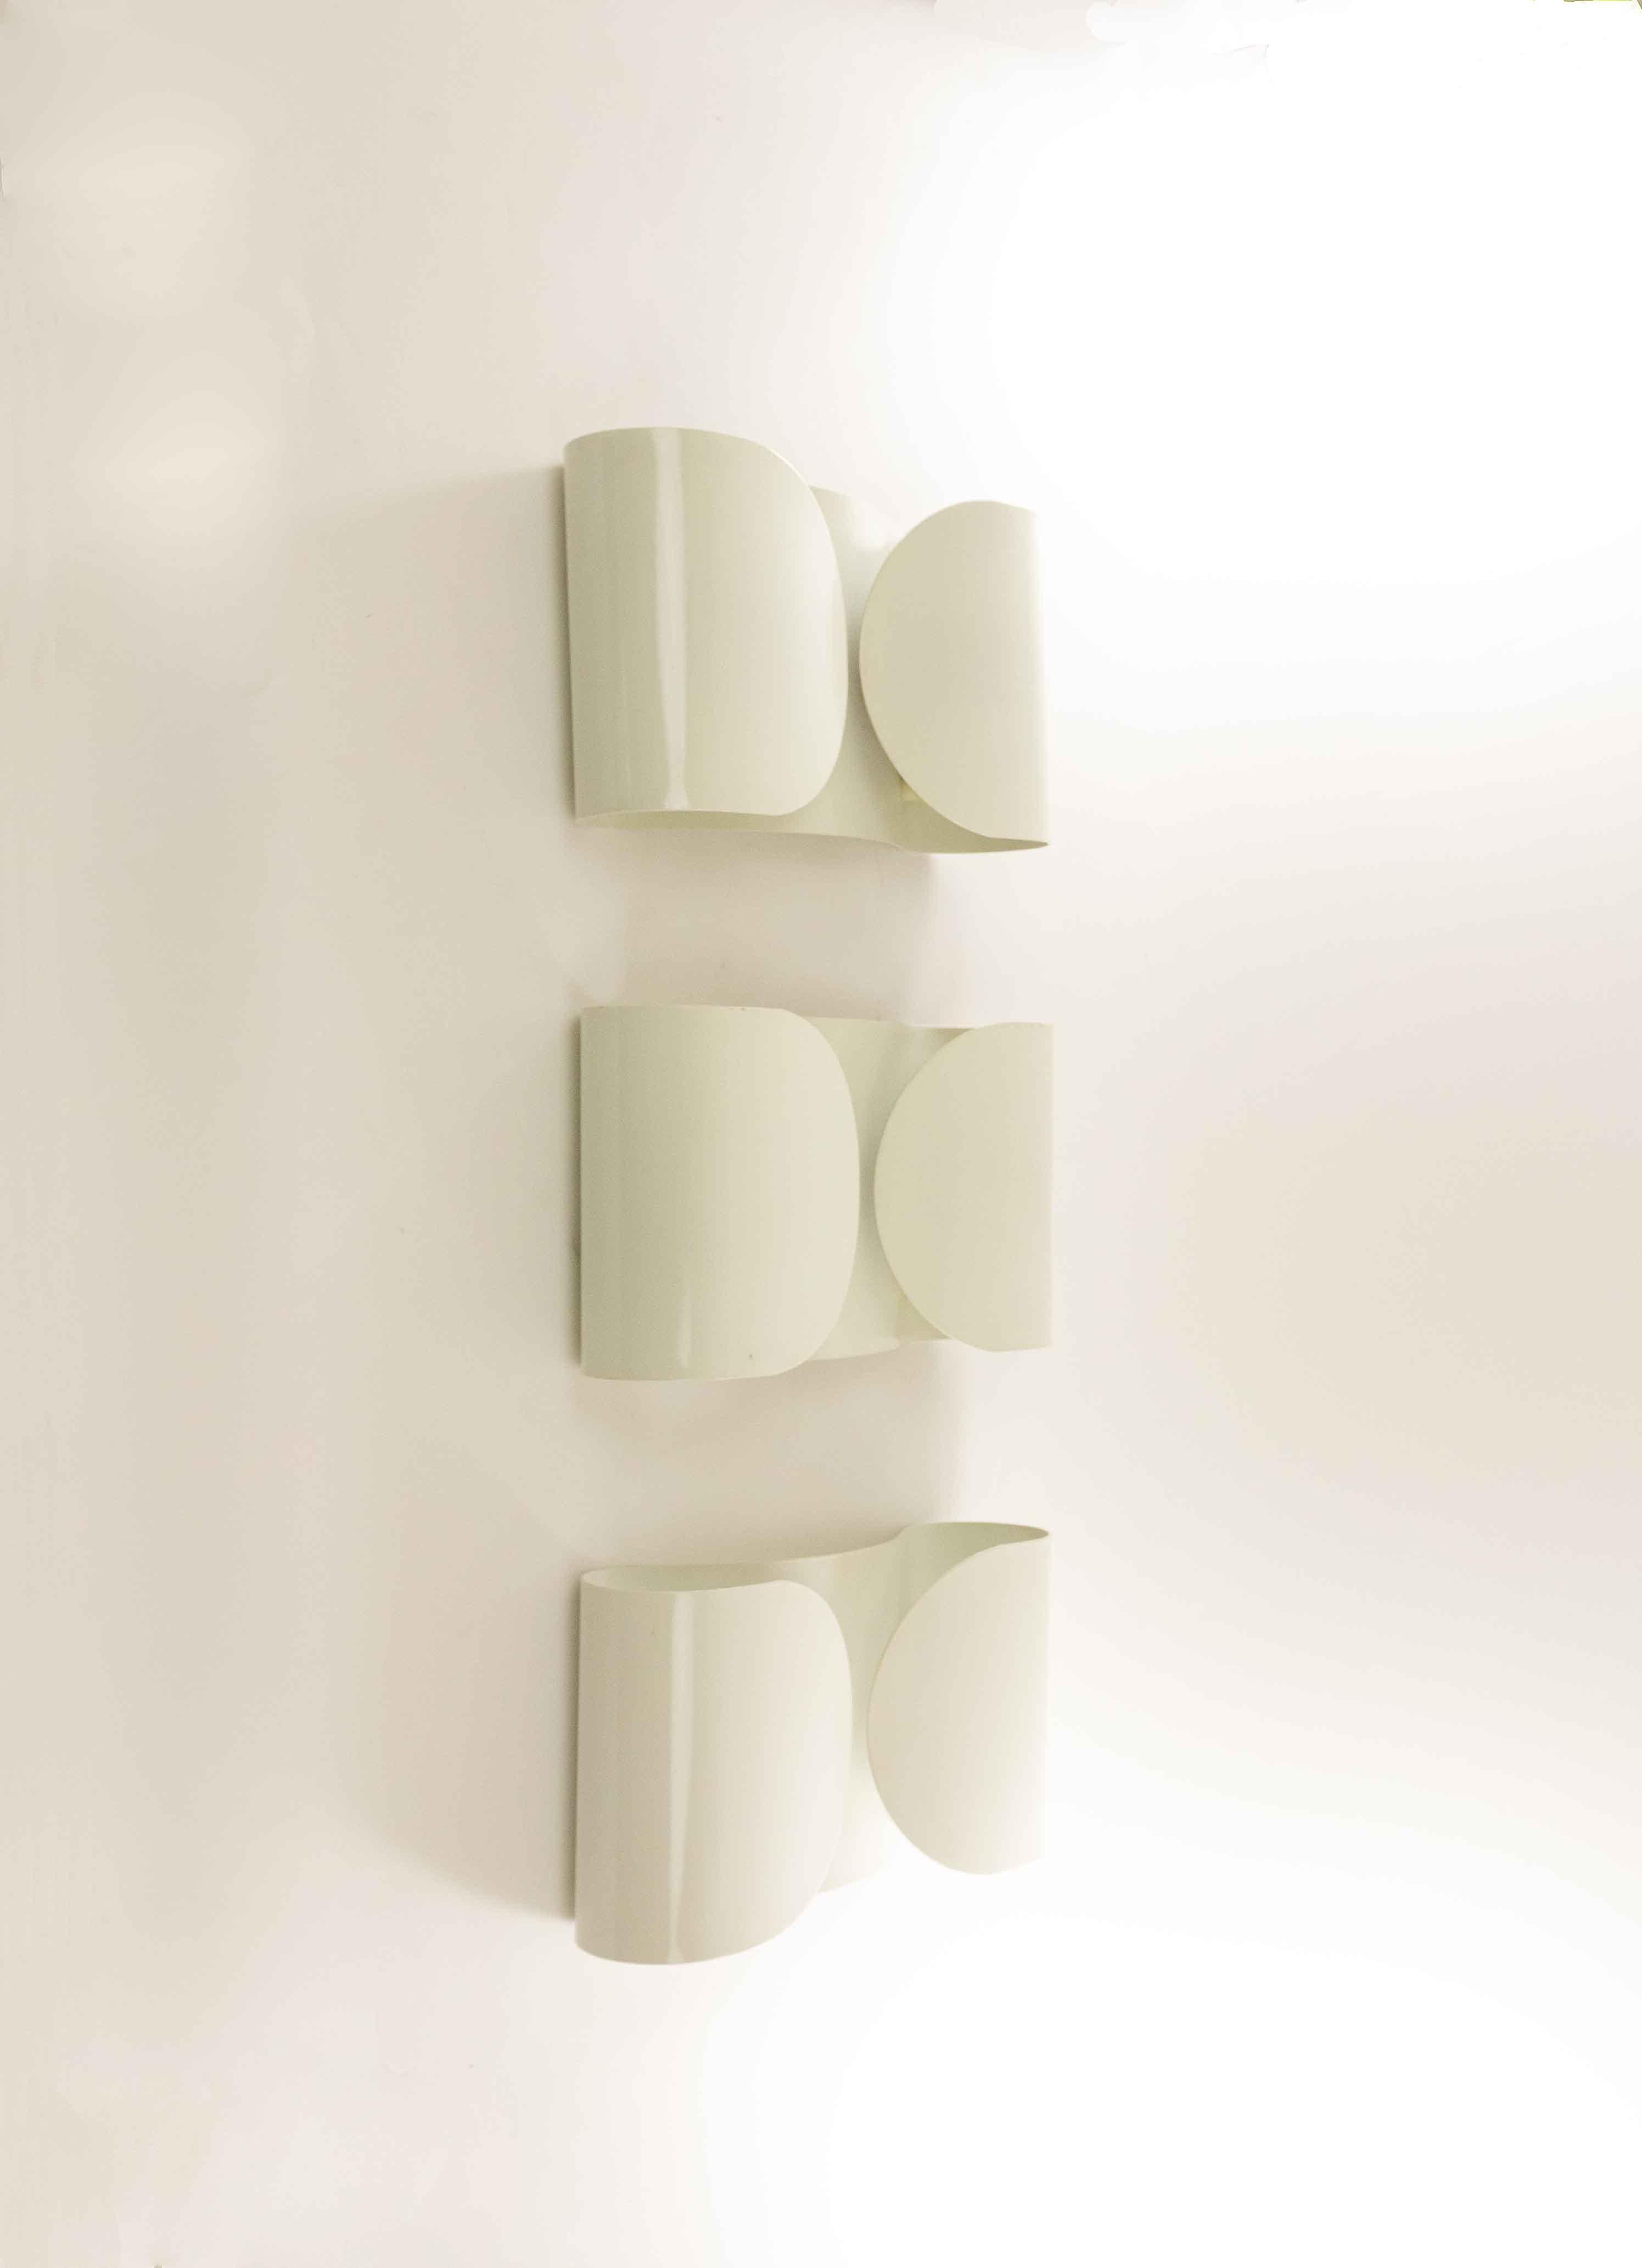 Three original Foglio wall lamps designed by Tobia Scarpa for Flos in 1966. These off-white enameled lamps with their organic shapes create warm ambient light.

The price is for the set.

This piece is described in the Repertorio del Design